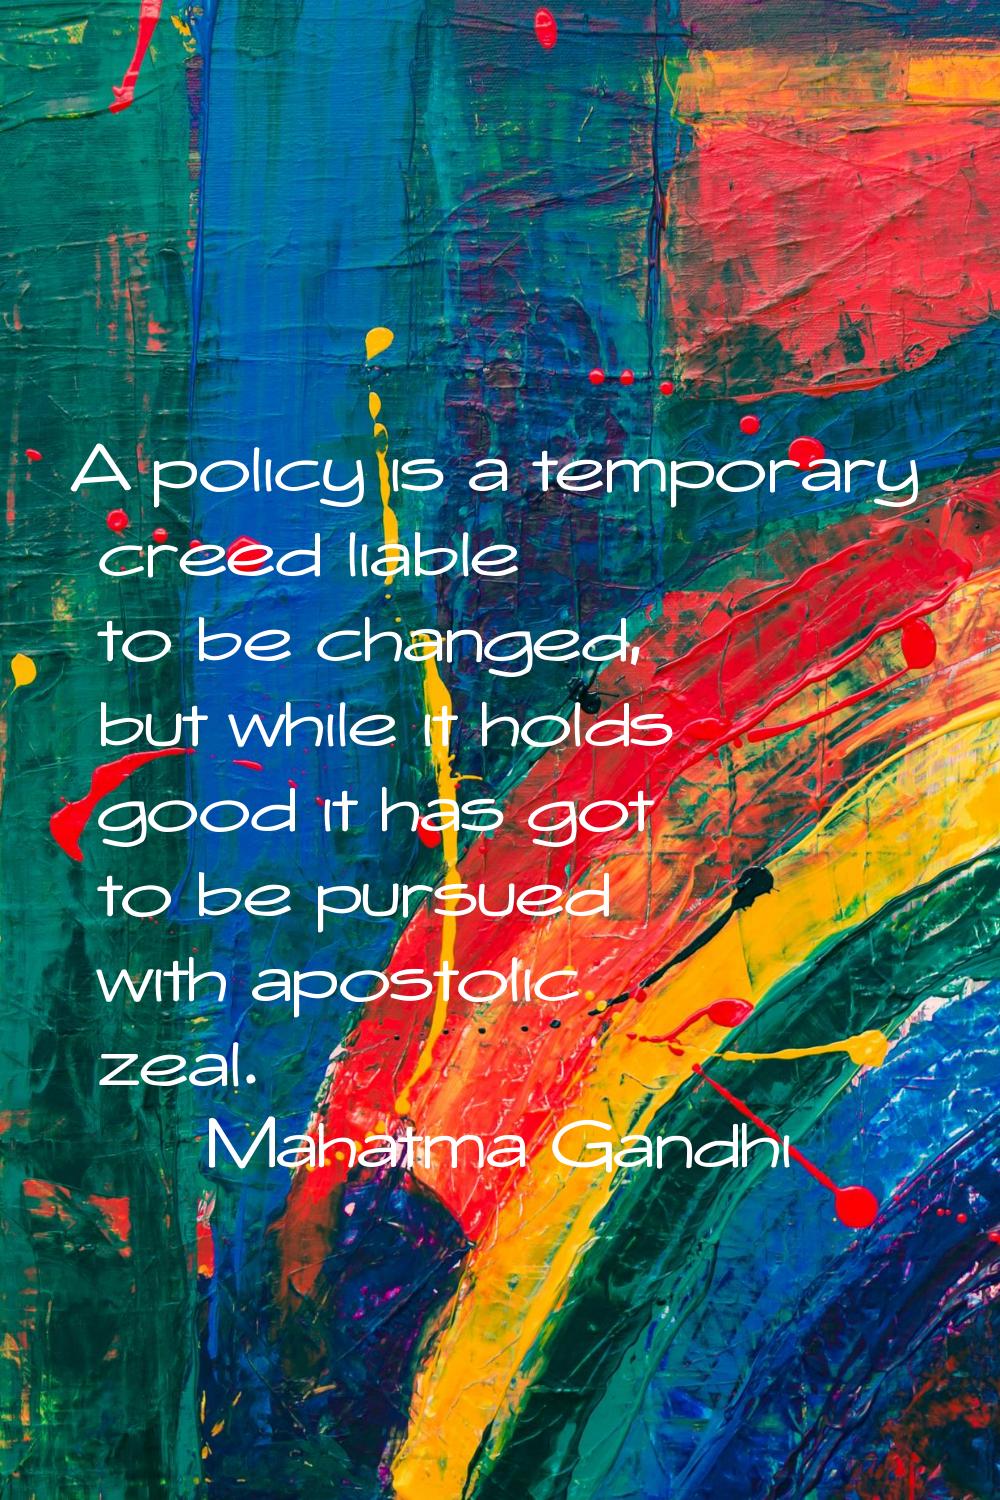 A policy is a temporary creed liable to be changed, but while it holds good it has got to be pursue